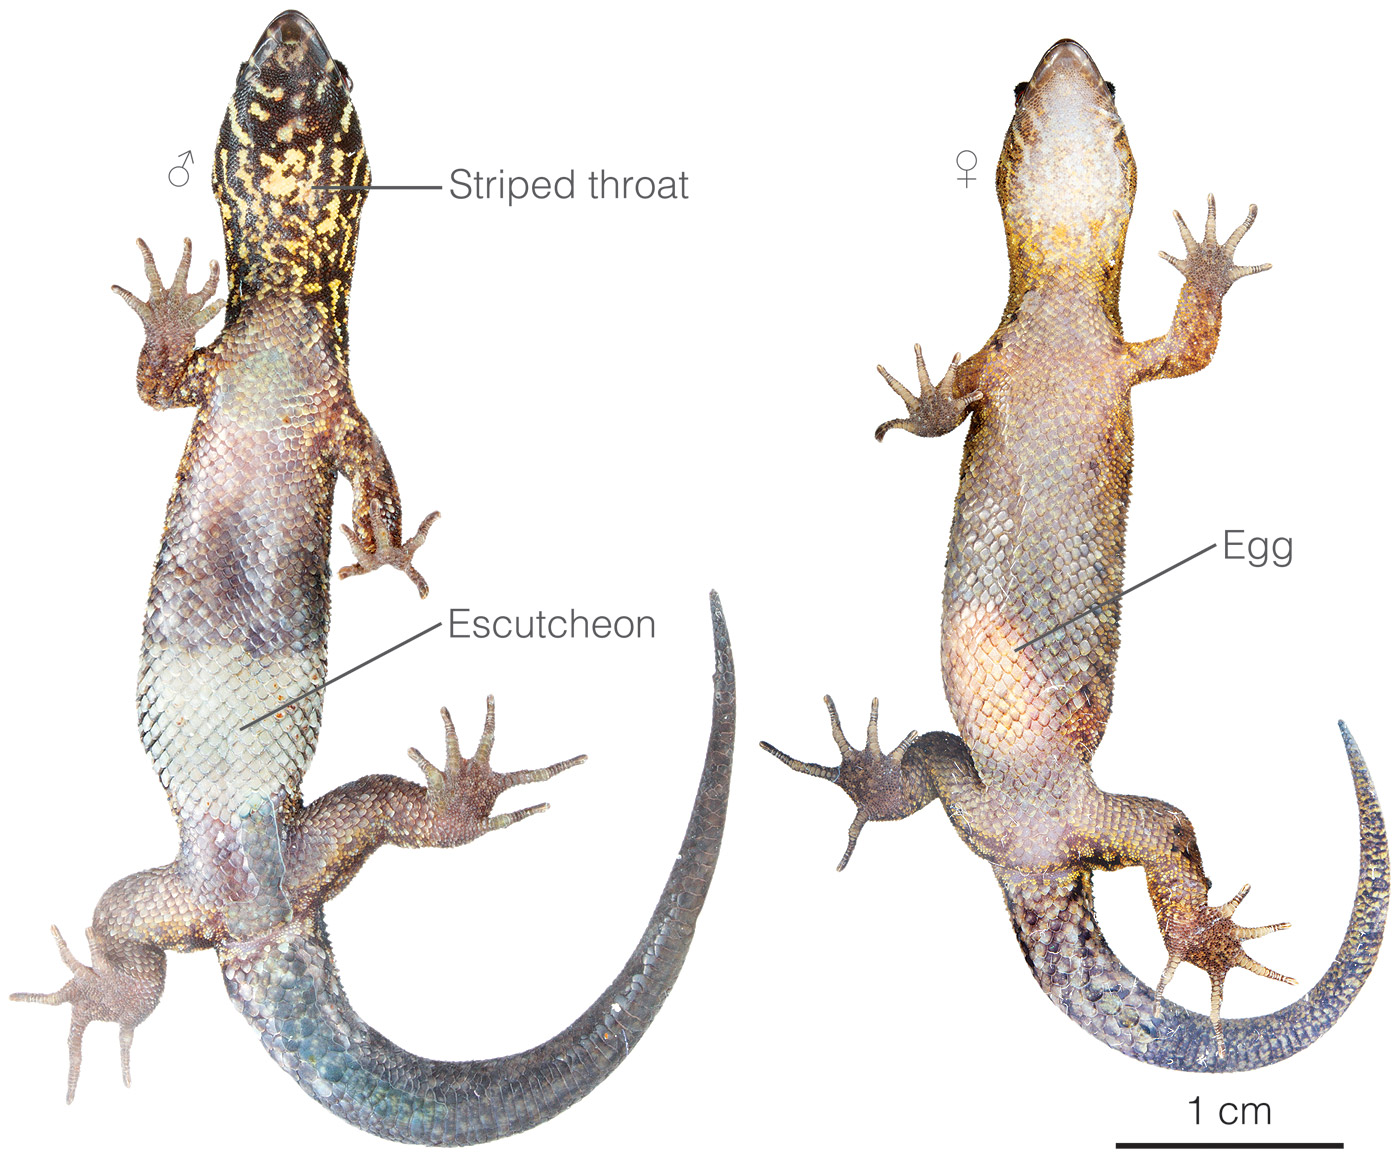 Figure showing morphological differences between males and females of Lepidoblepharis ruthveni